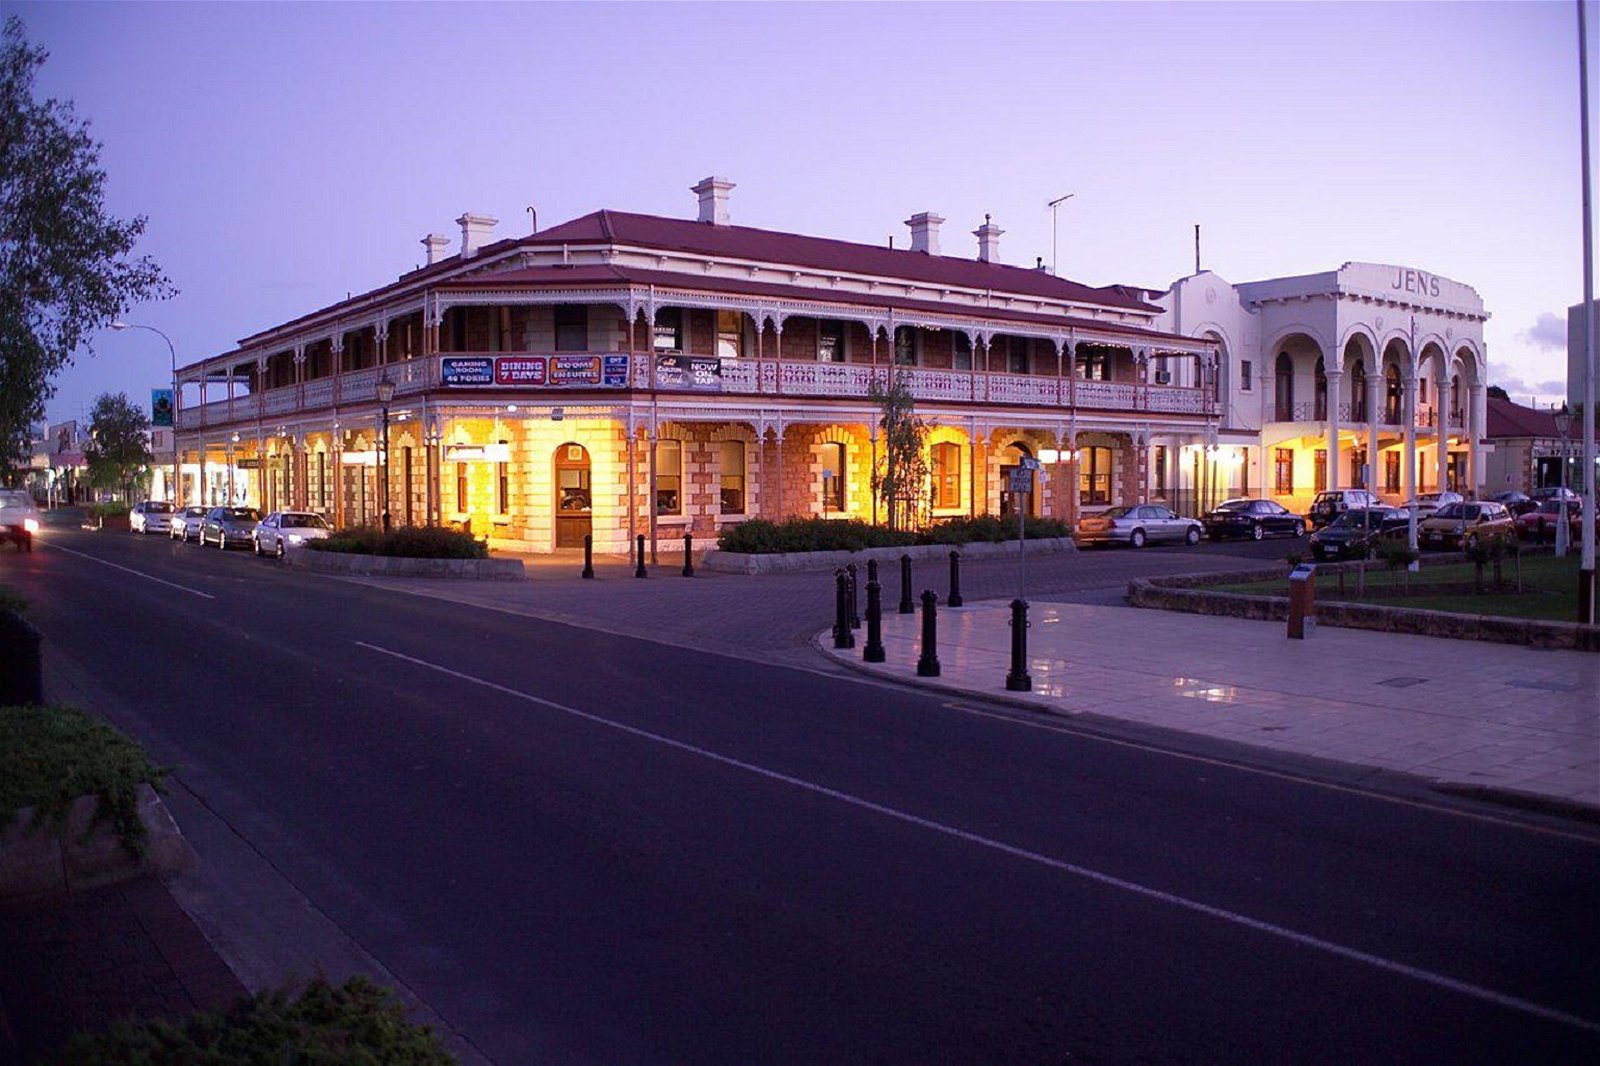 Jens Town Hall Hotel - Northern Rivers Accommodation